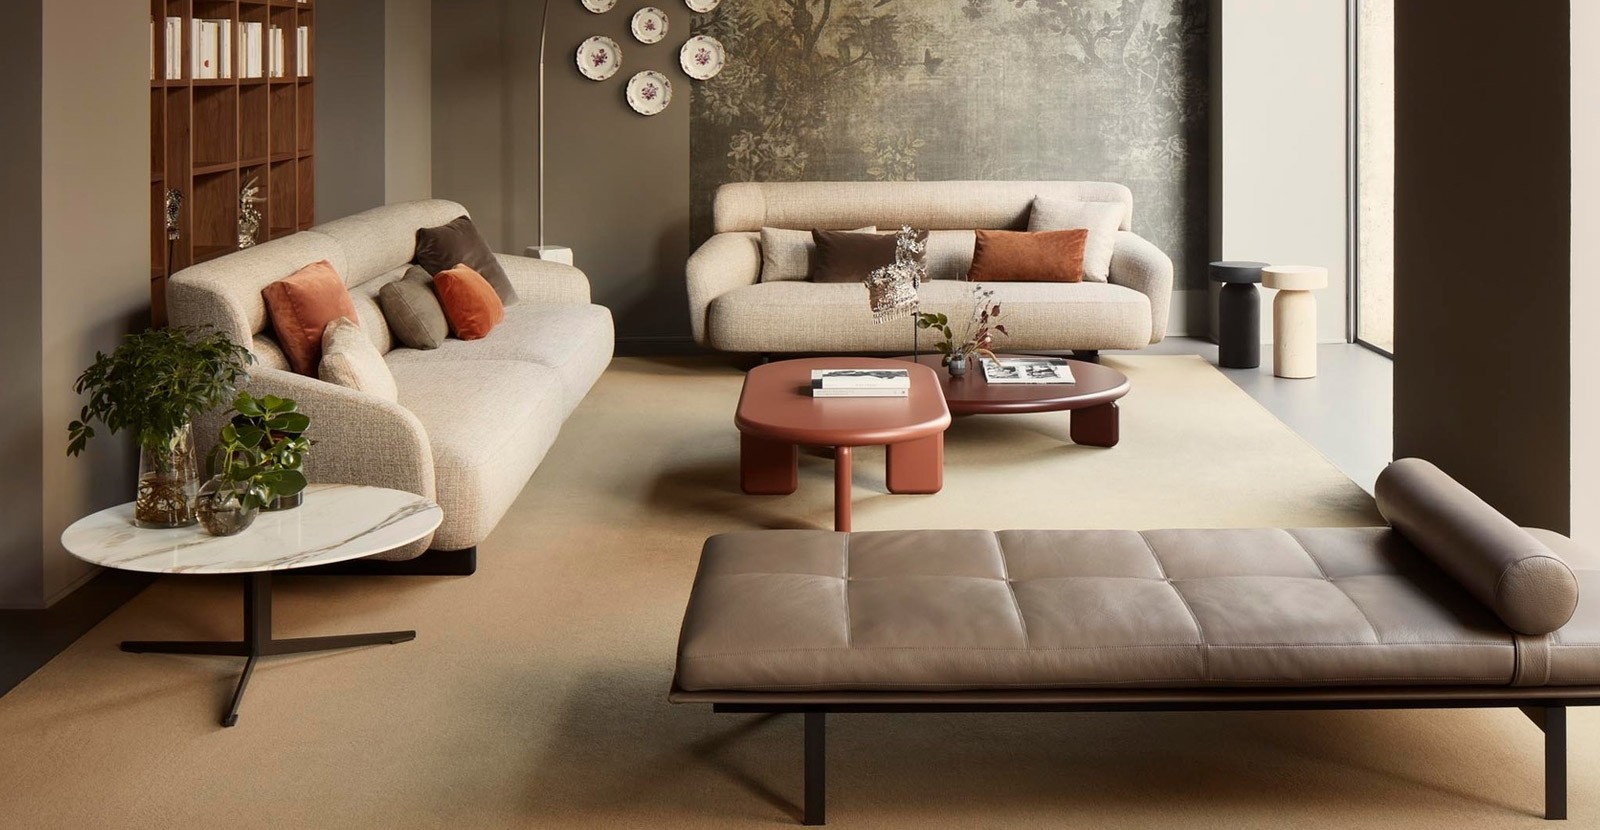 Discover Lema furniture and ask a special offer on Marchese